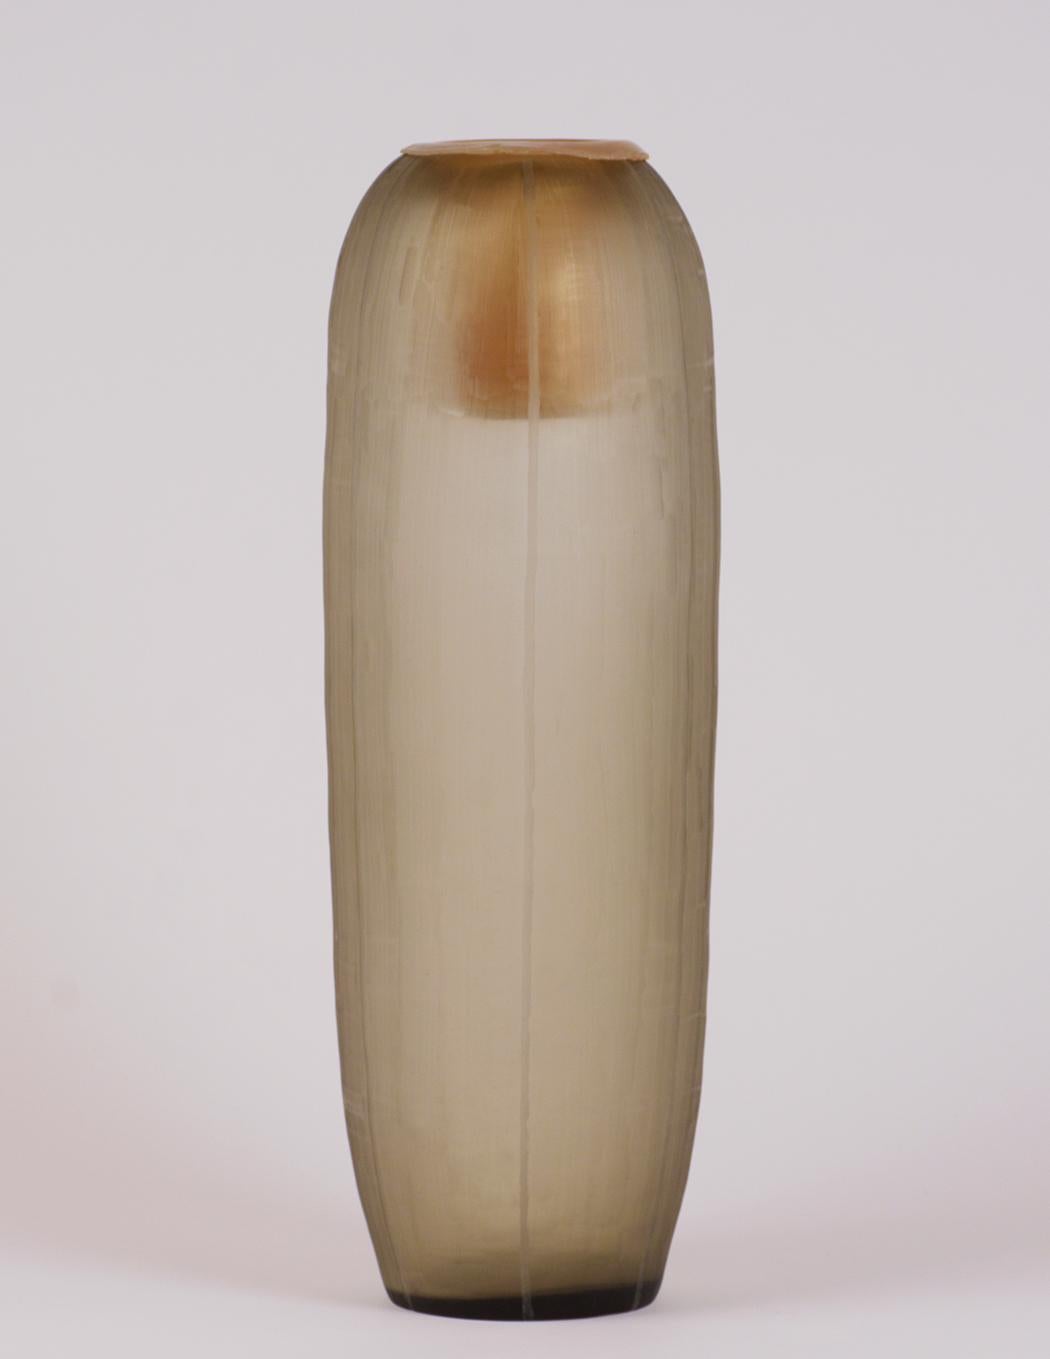 This original Guax Glass Co. Tall Vase features a smokey amber color with an etched pinstripe design going from the top to the bottom of the vase. This vase comes with the original plastic liner and is in very good condition ready to be used for